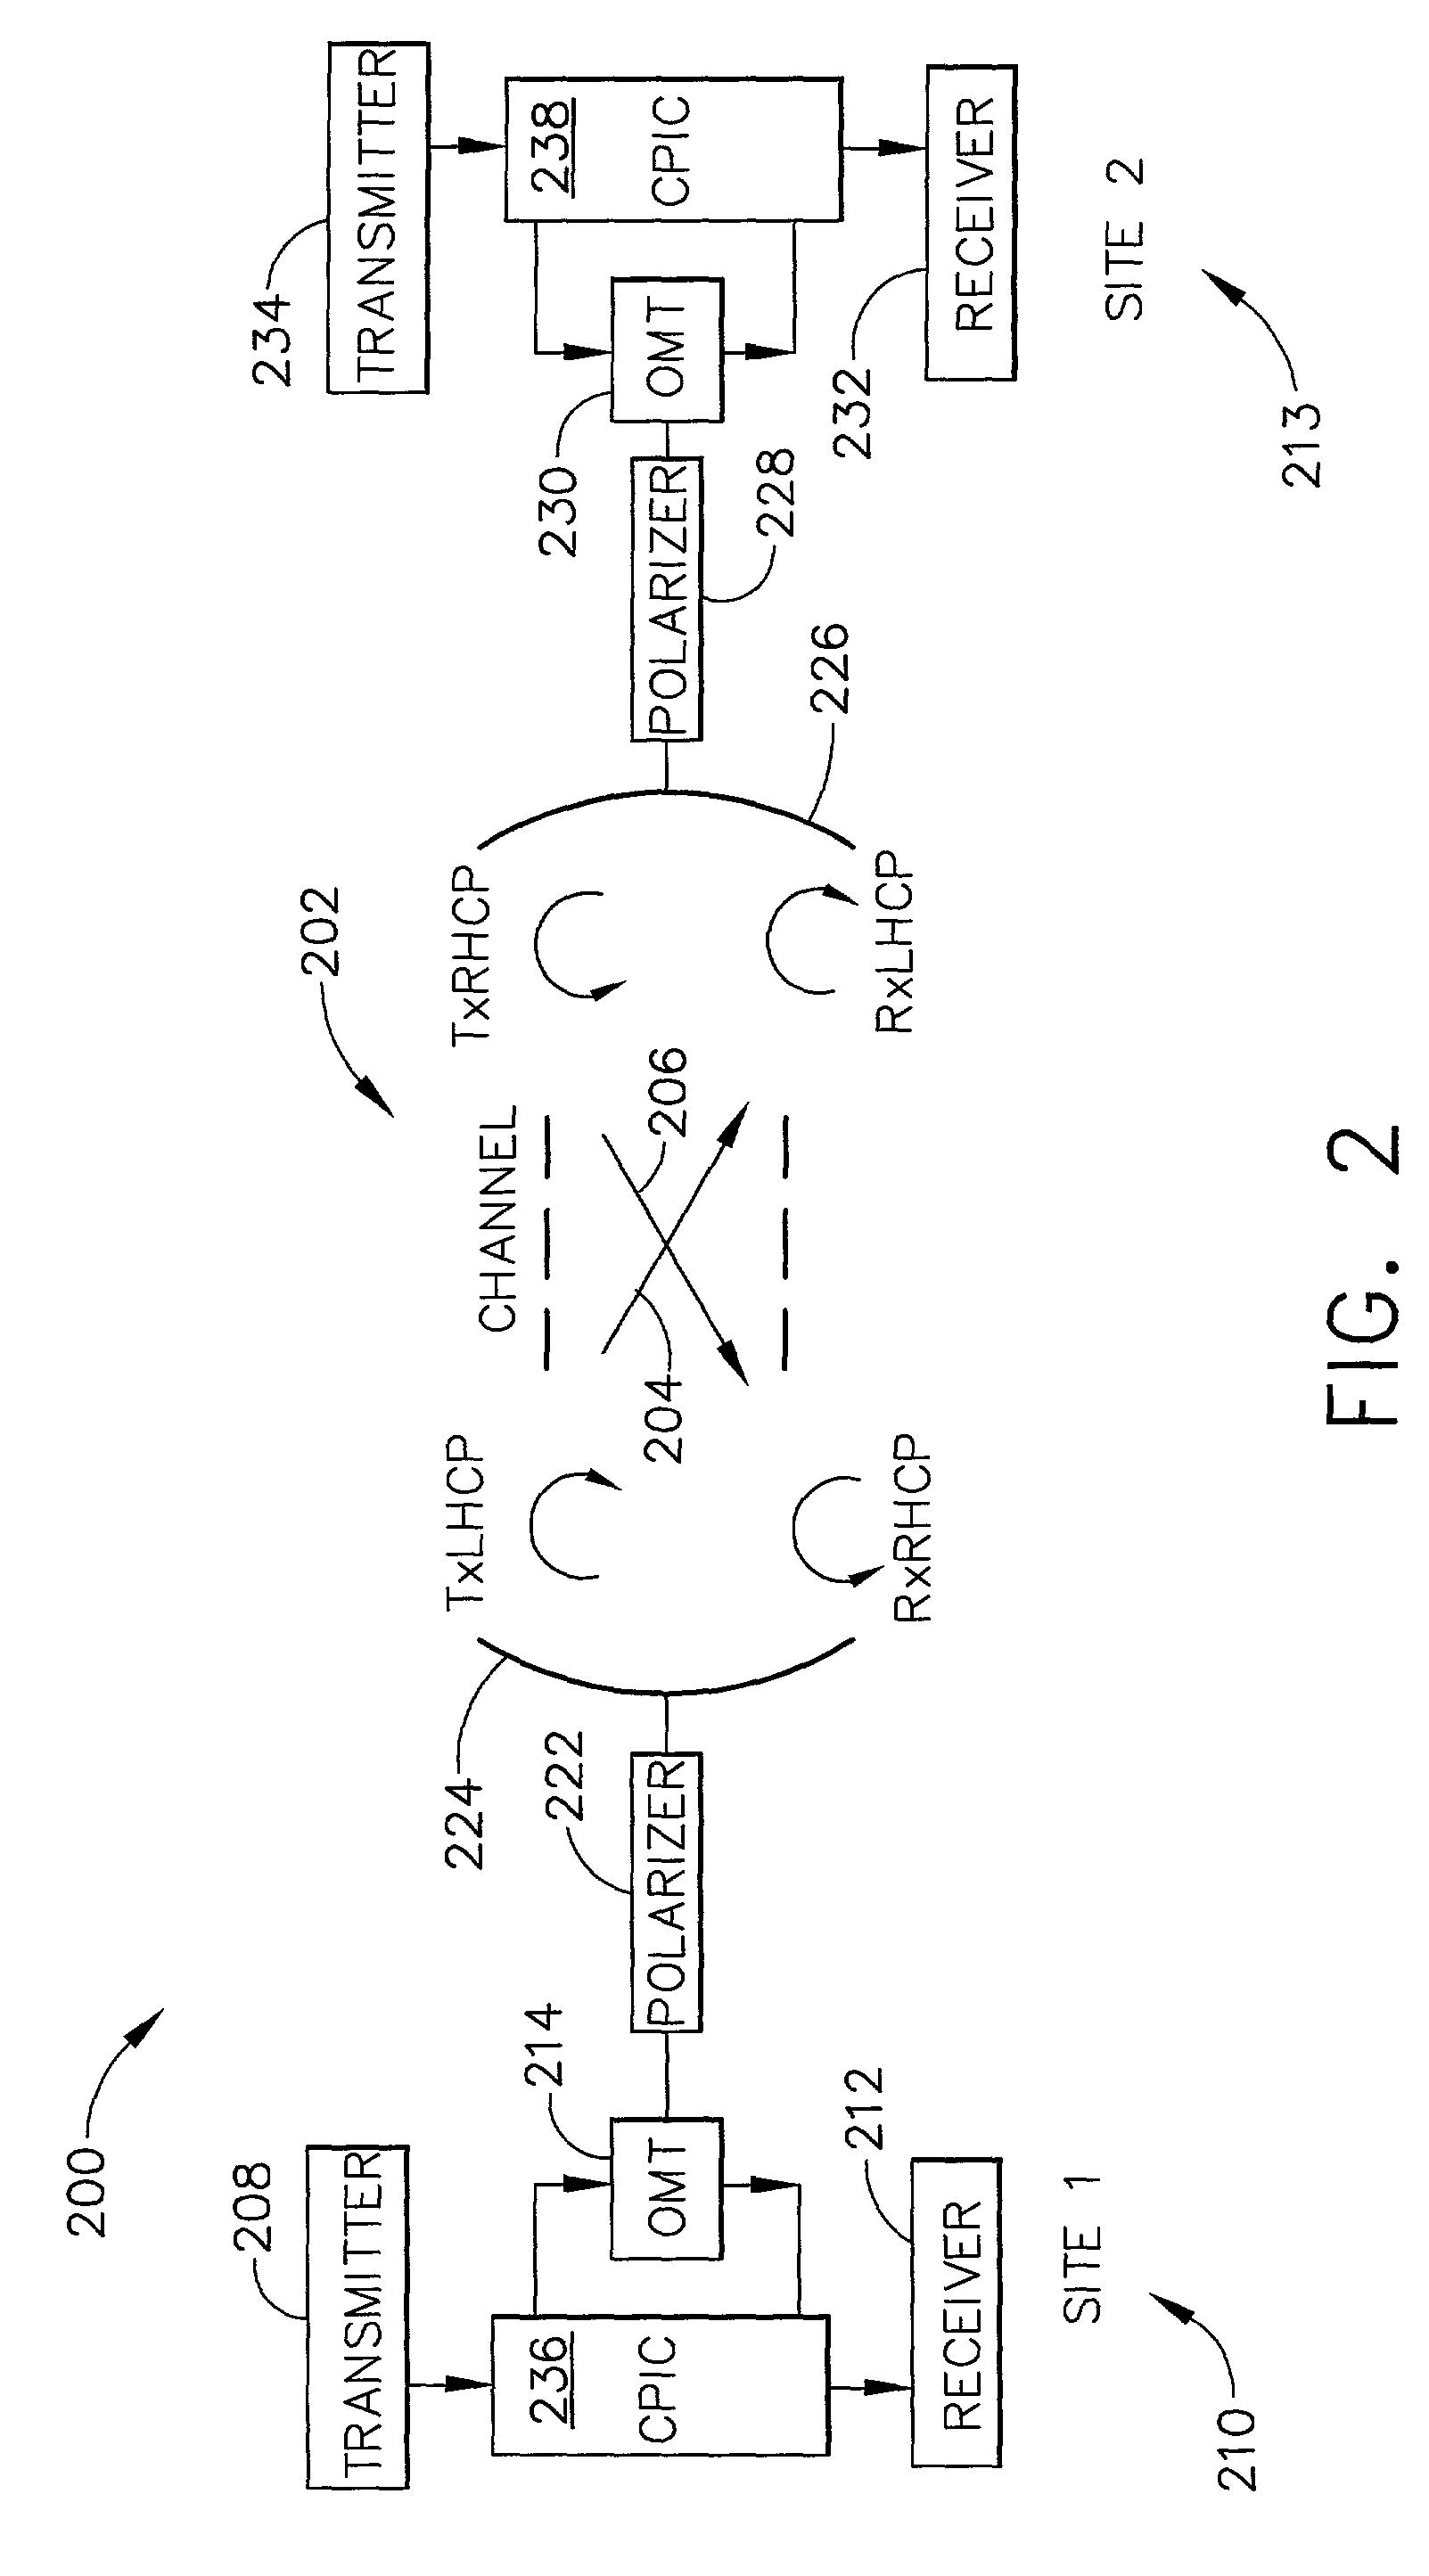 Polarization division duplexing with cross polarization interference canceller